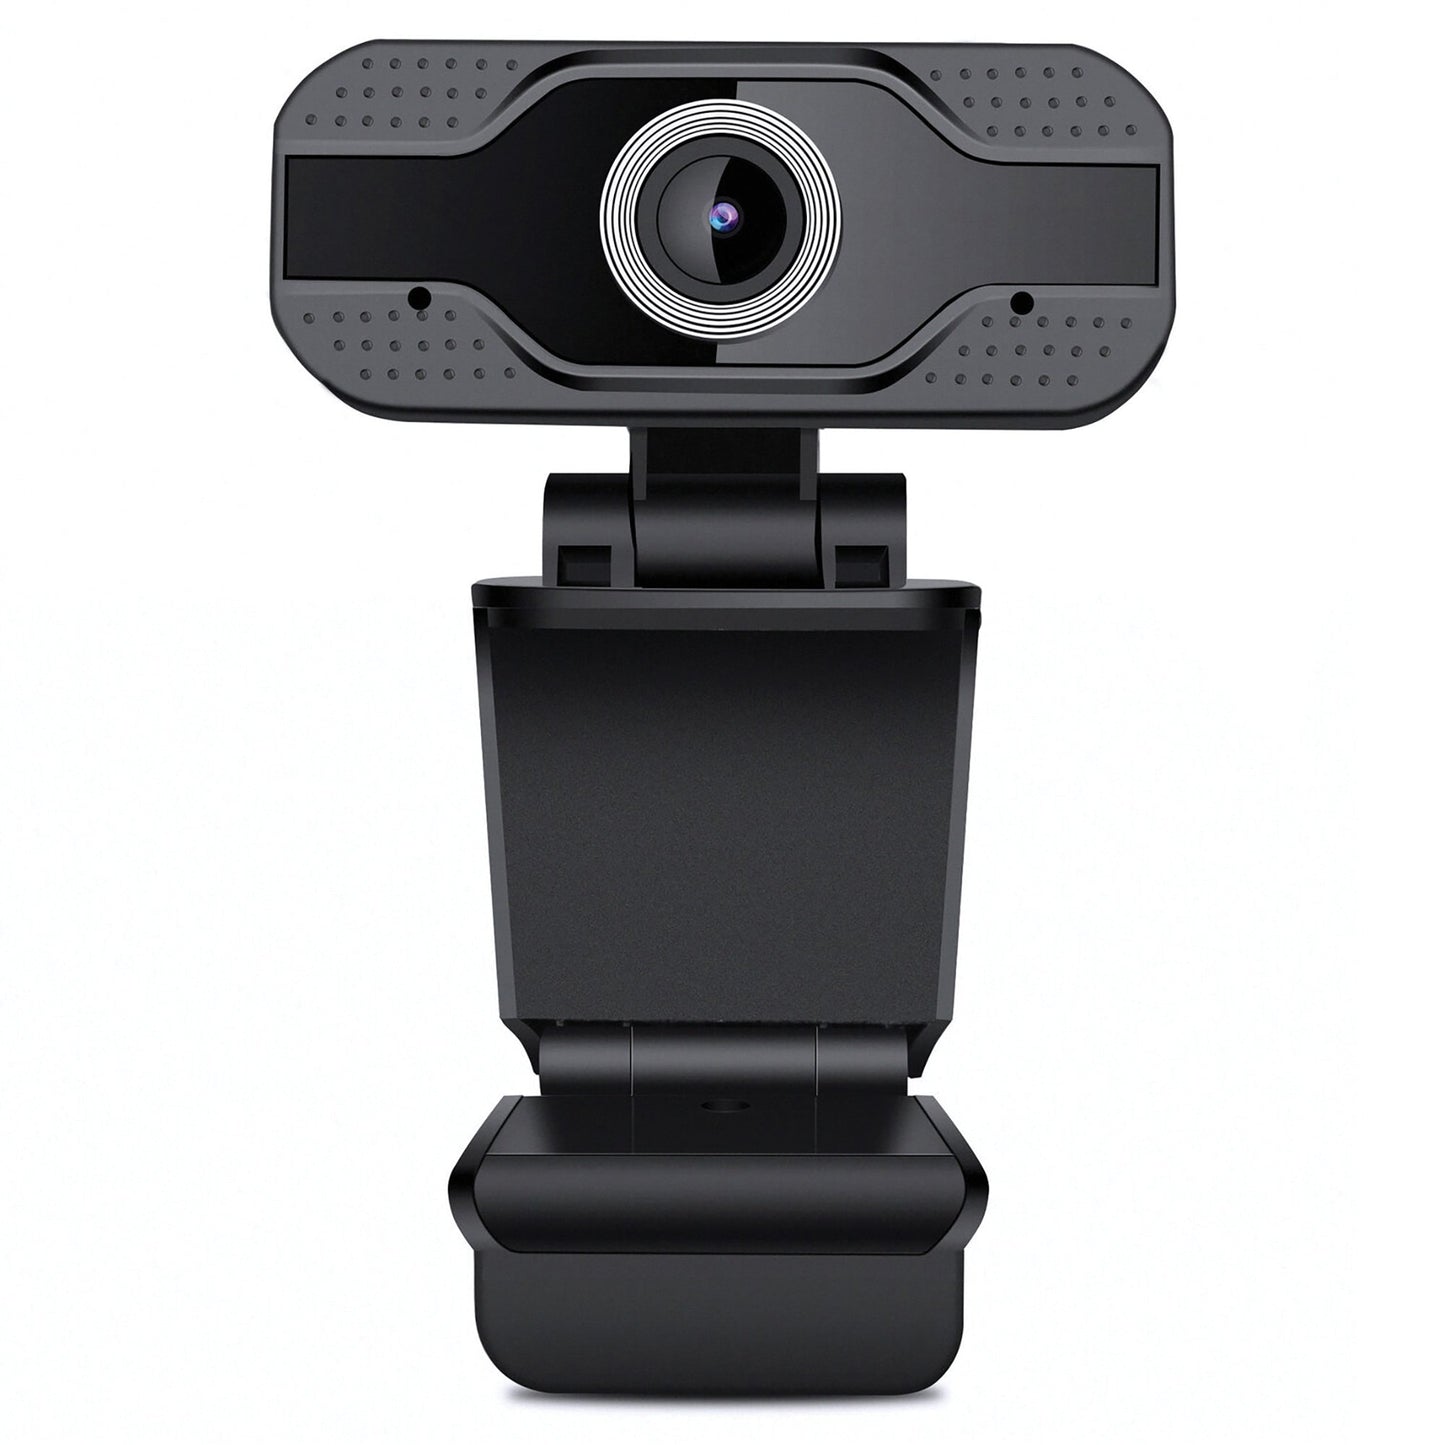 Blackmore Pro Audio BWC-902 USB 1080p Webcam with Built-In Microphone